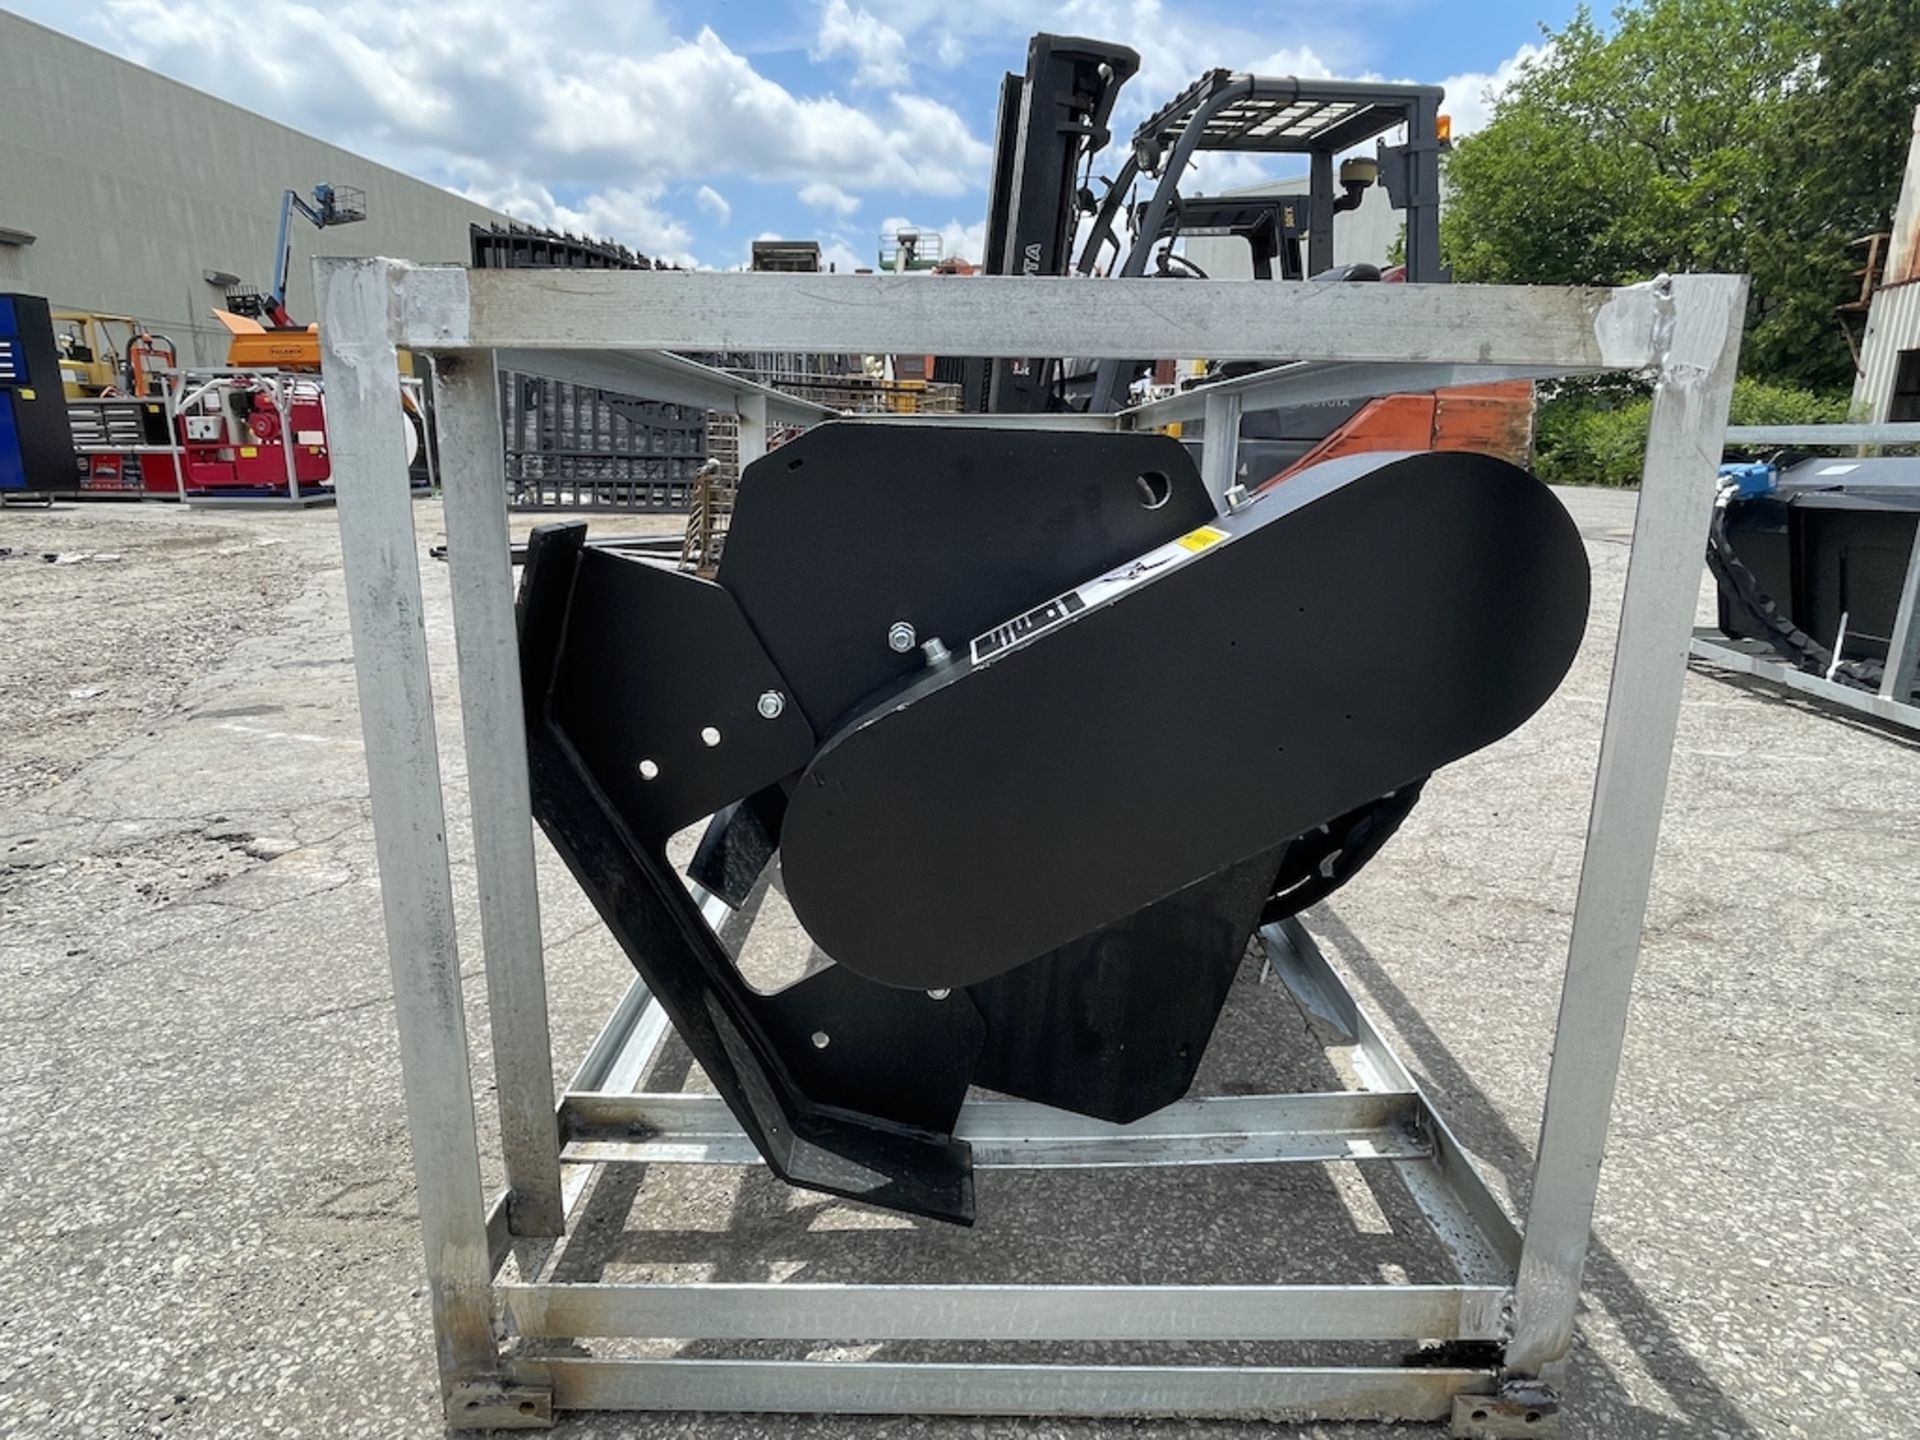 Brand New 72" Rotary Cultivator Skid Steer Attachment (NY39E) - Image 2 of 9